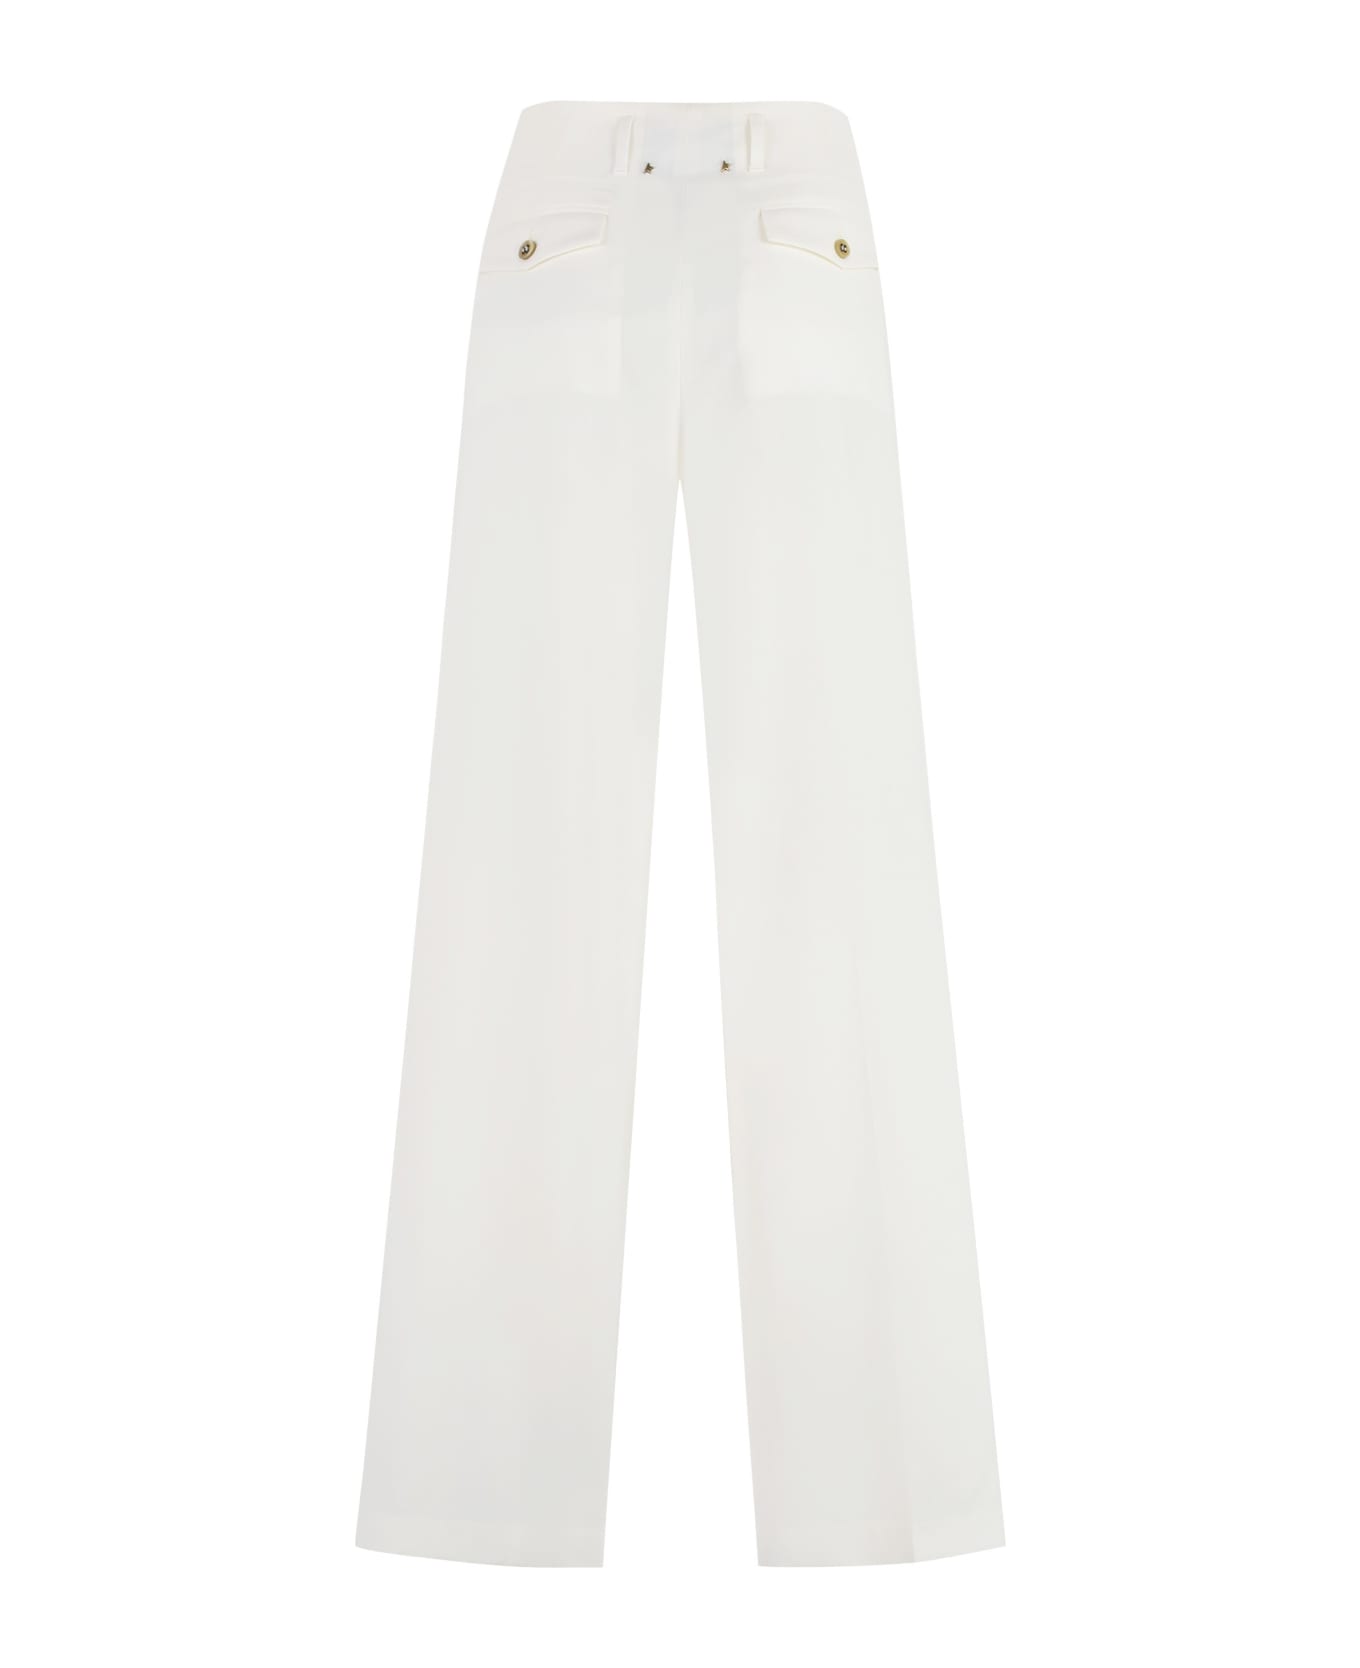 Golden Goose Flavia Wool Blend Trousers - Ivory